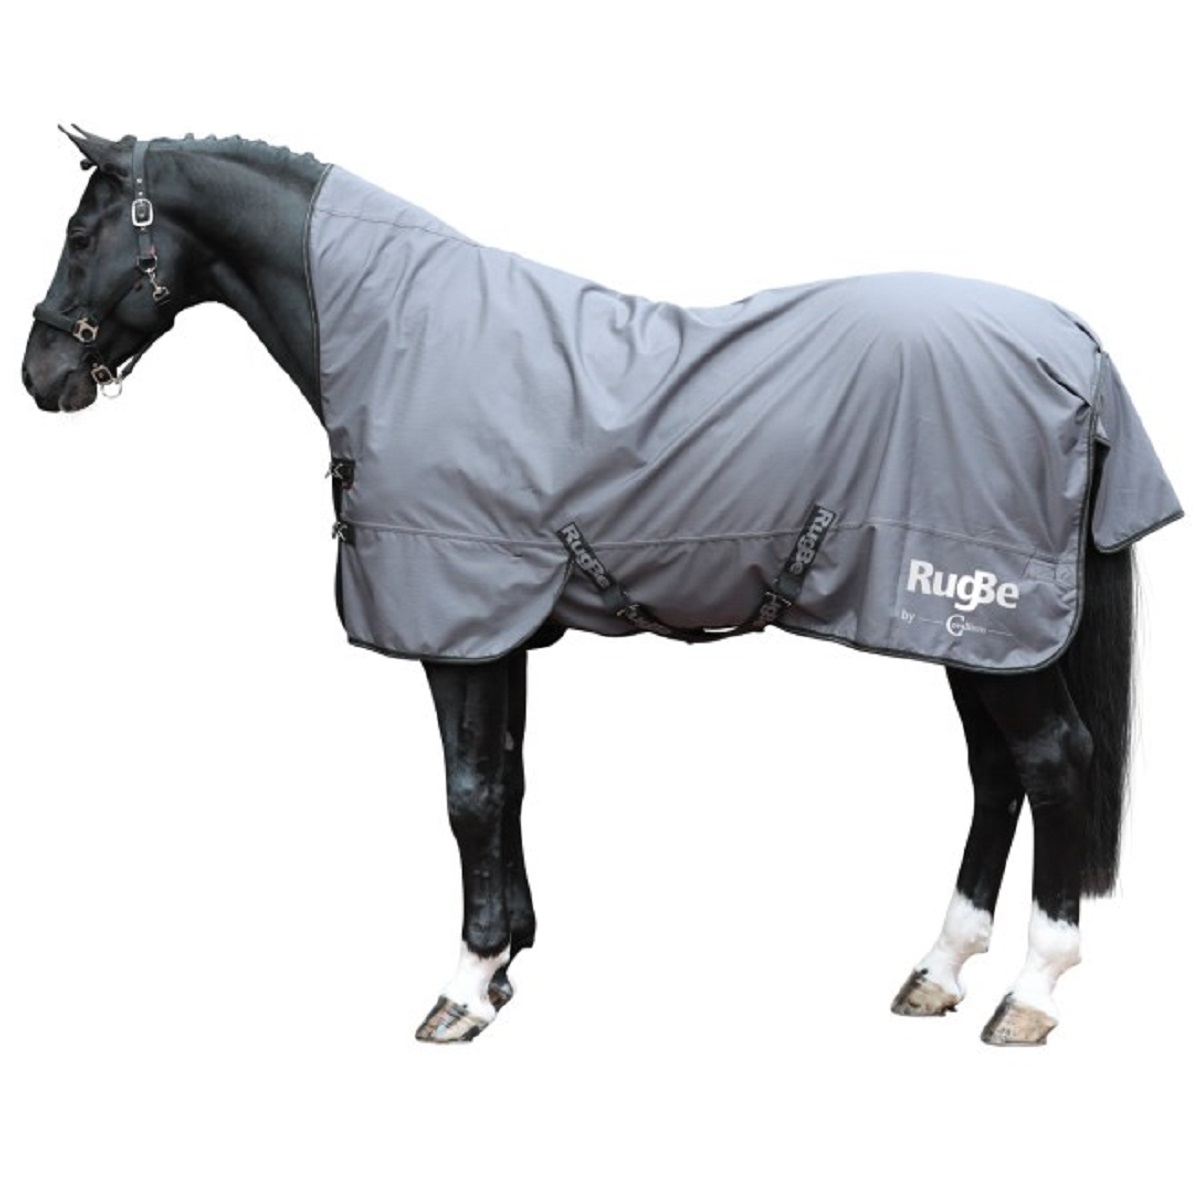 Covalliero Turnout Rug RugBe HighNeck 105